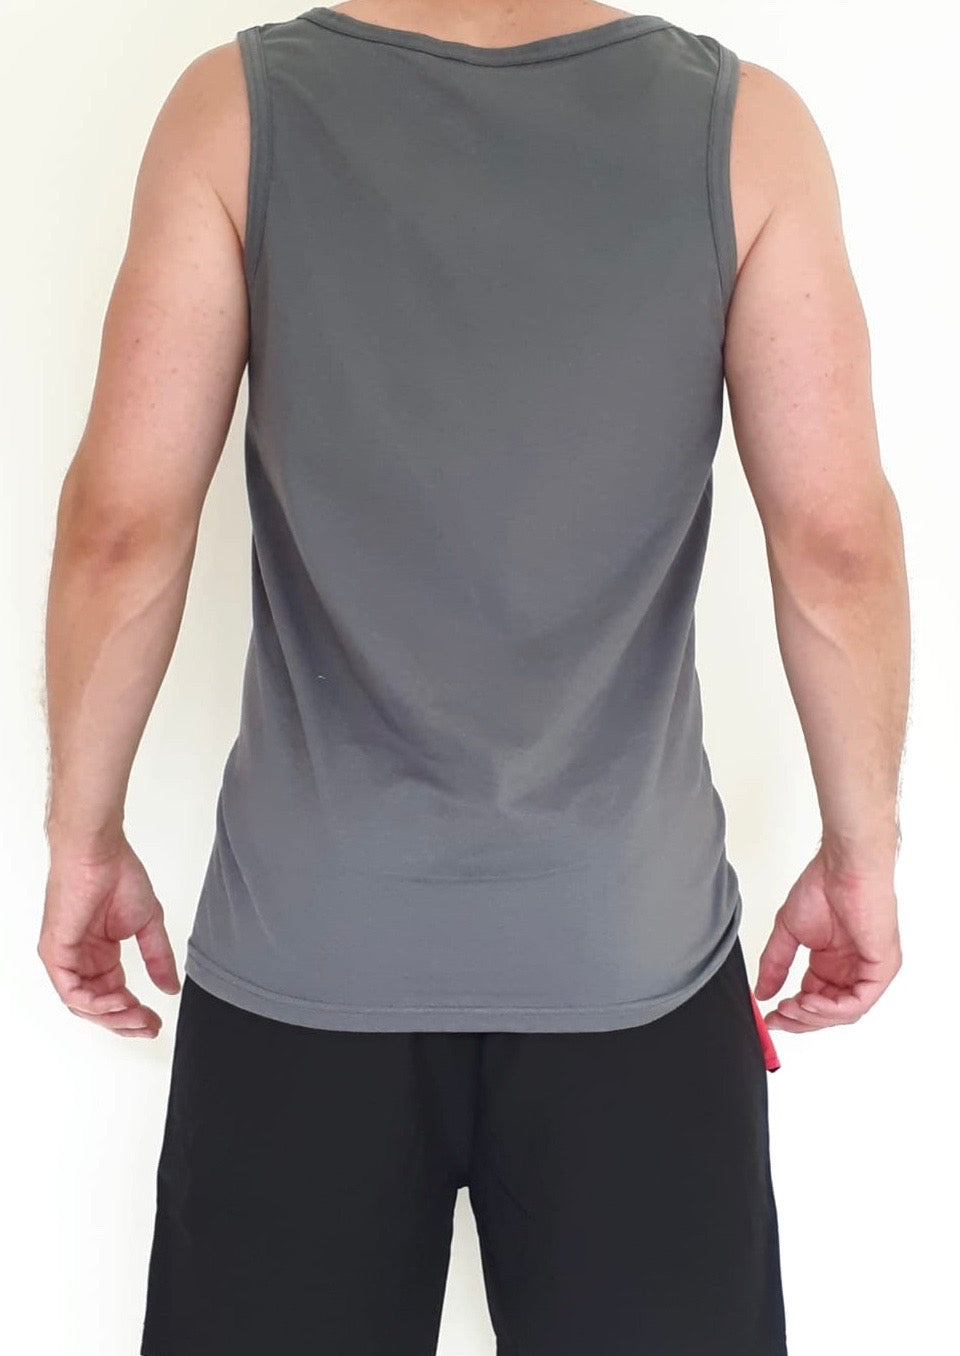 Men's charcoal vest with Solo Traveller text. View of the back